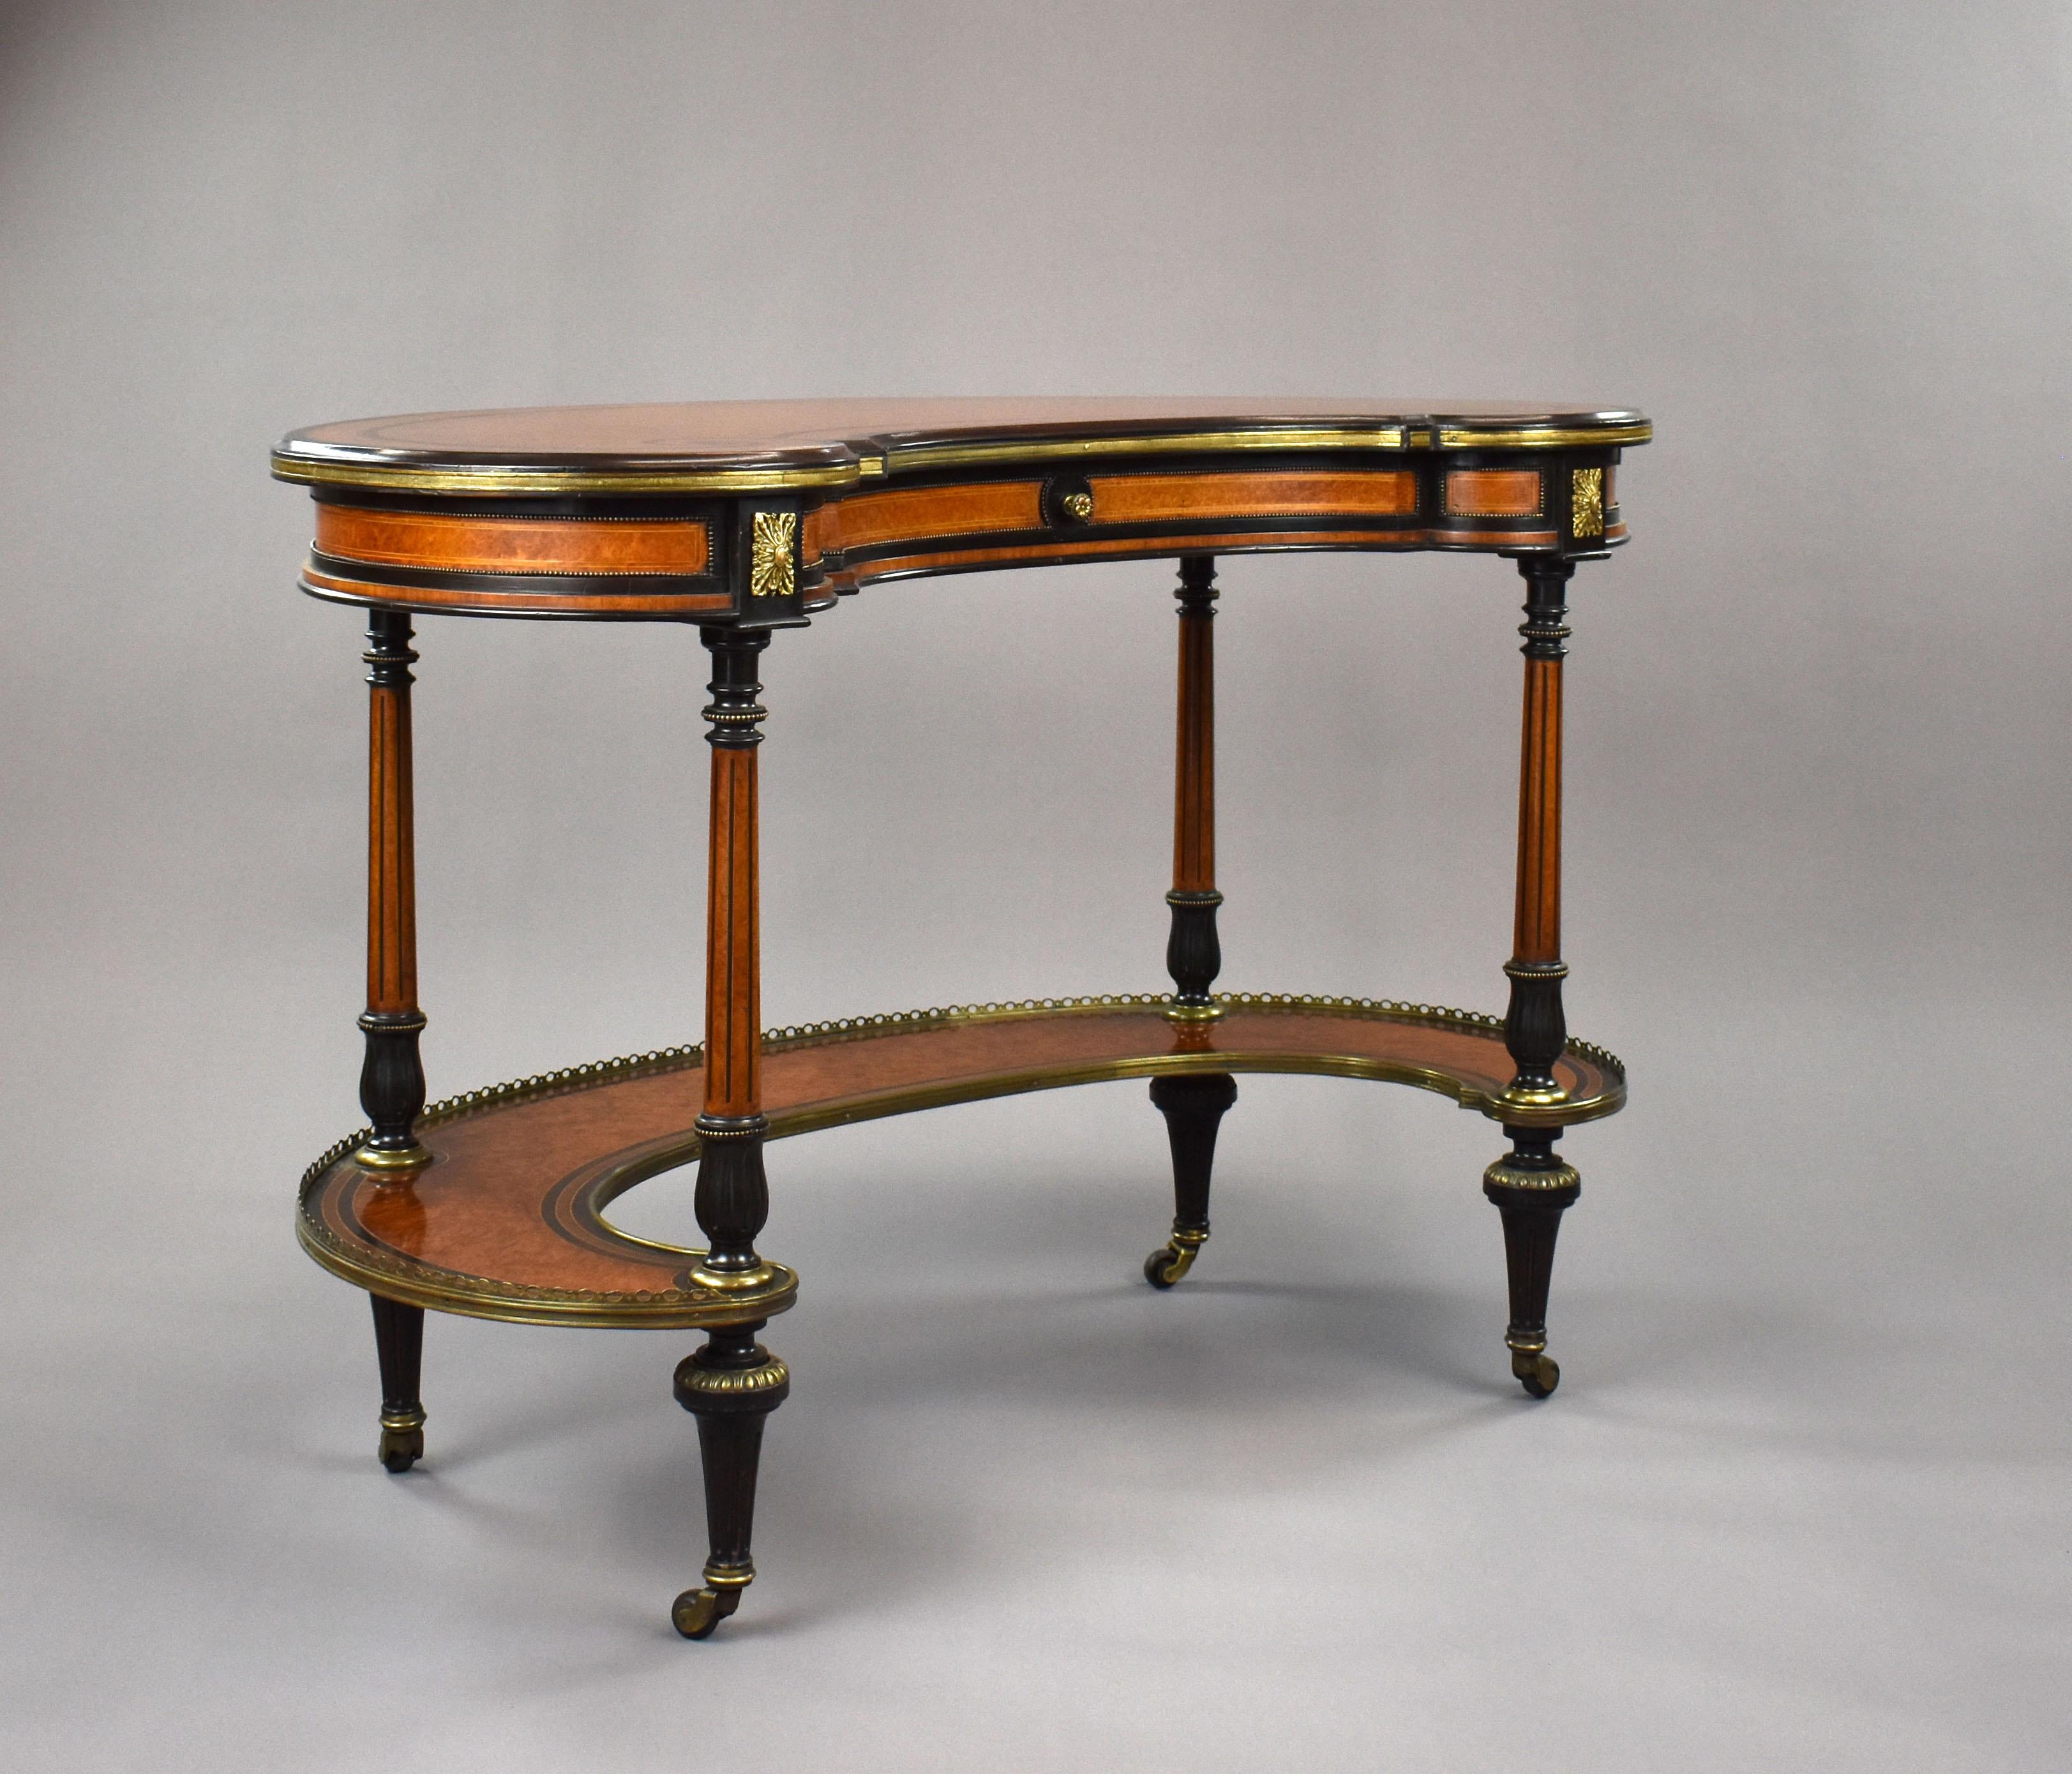 For sale is a top quality mid Victorian amboyna, burr walnut and ebonised kidney shaped writing table by Gillows of Lancaster. The top is nicely inlaid with ebony and white line stringing, above a single drawer to the front with a single brass